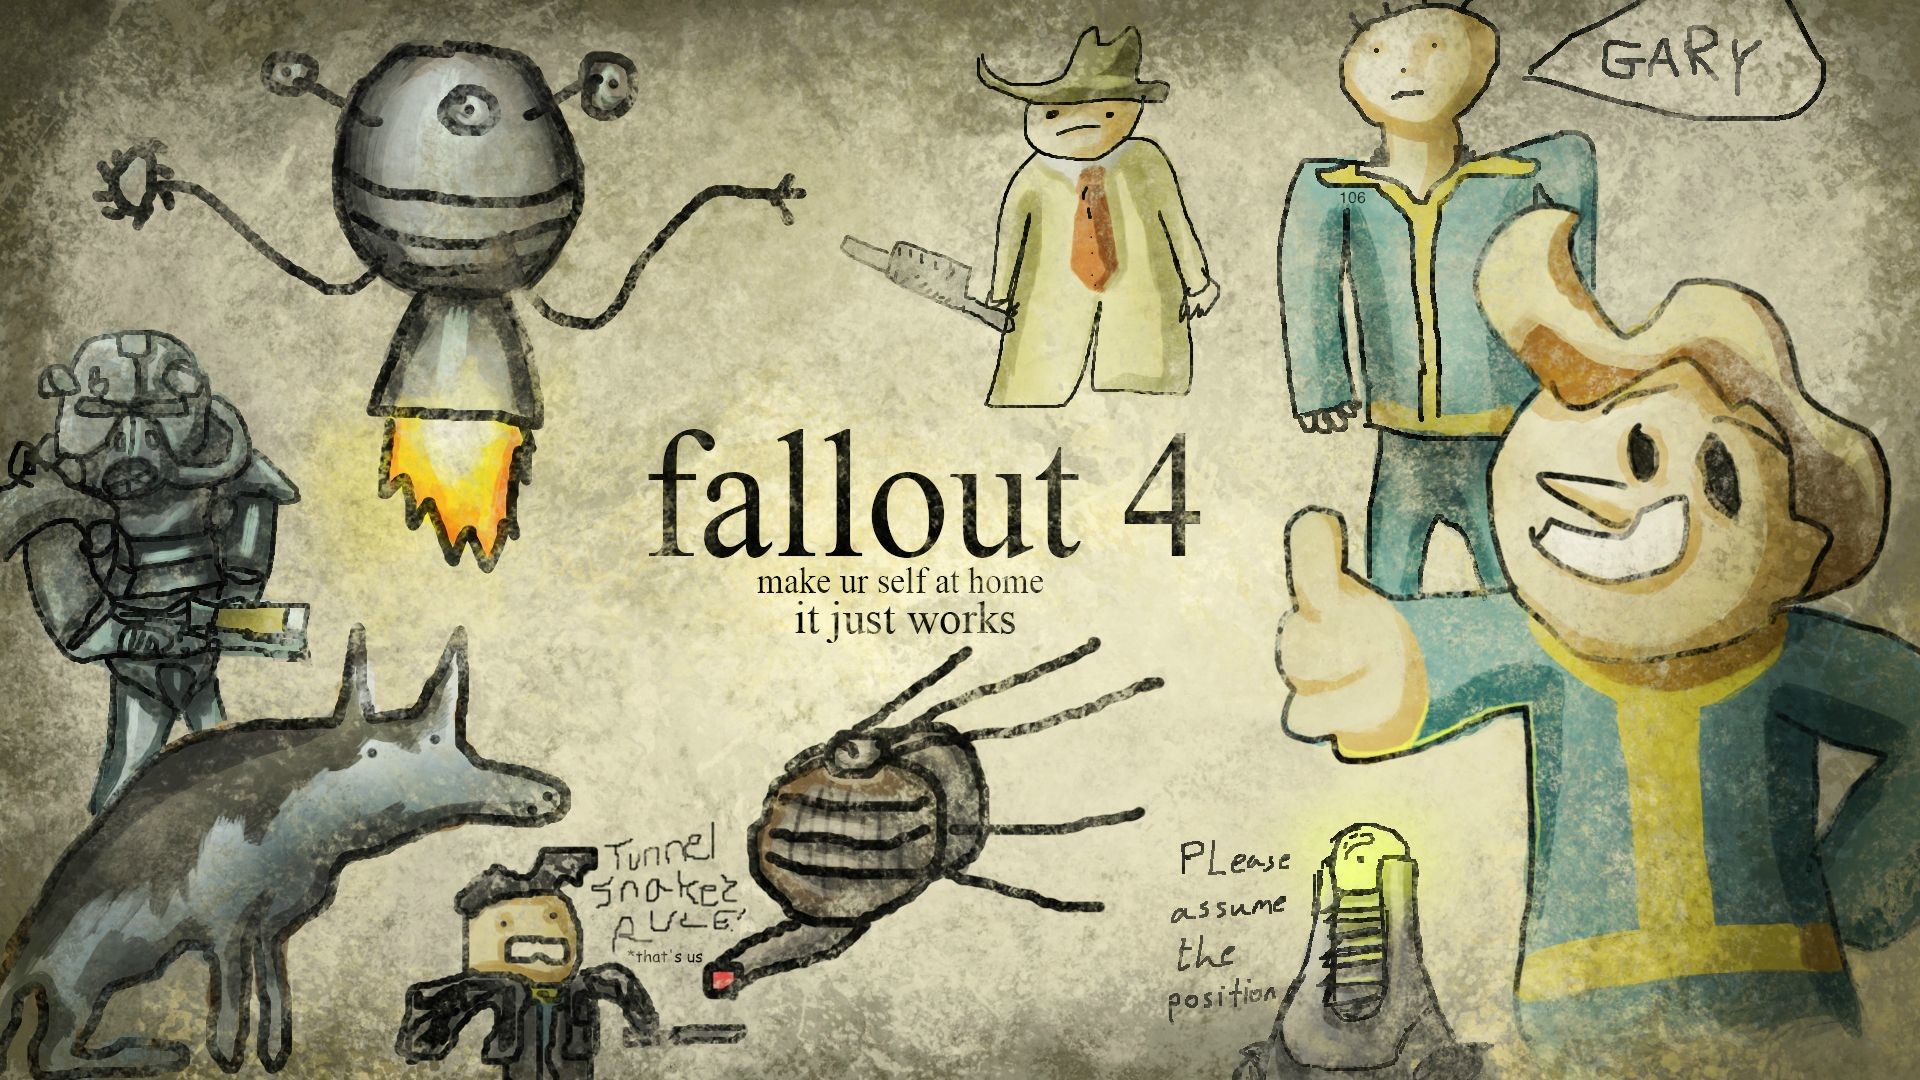 Those are nice, but there is only one true Fallout wallpaper